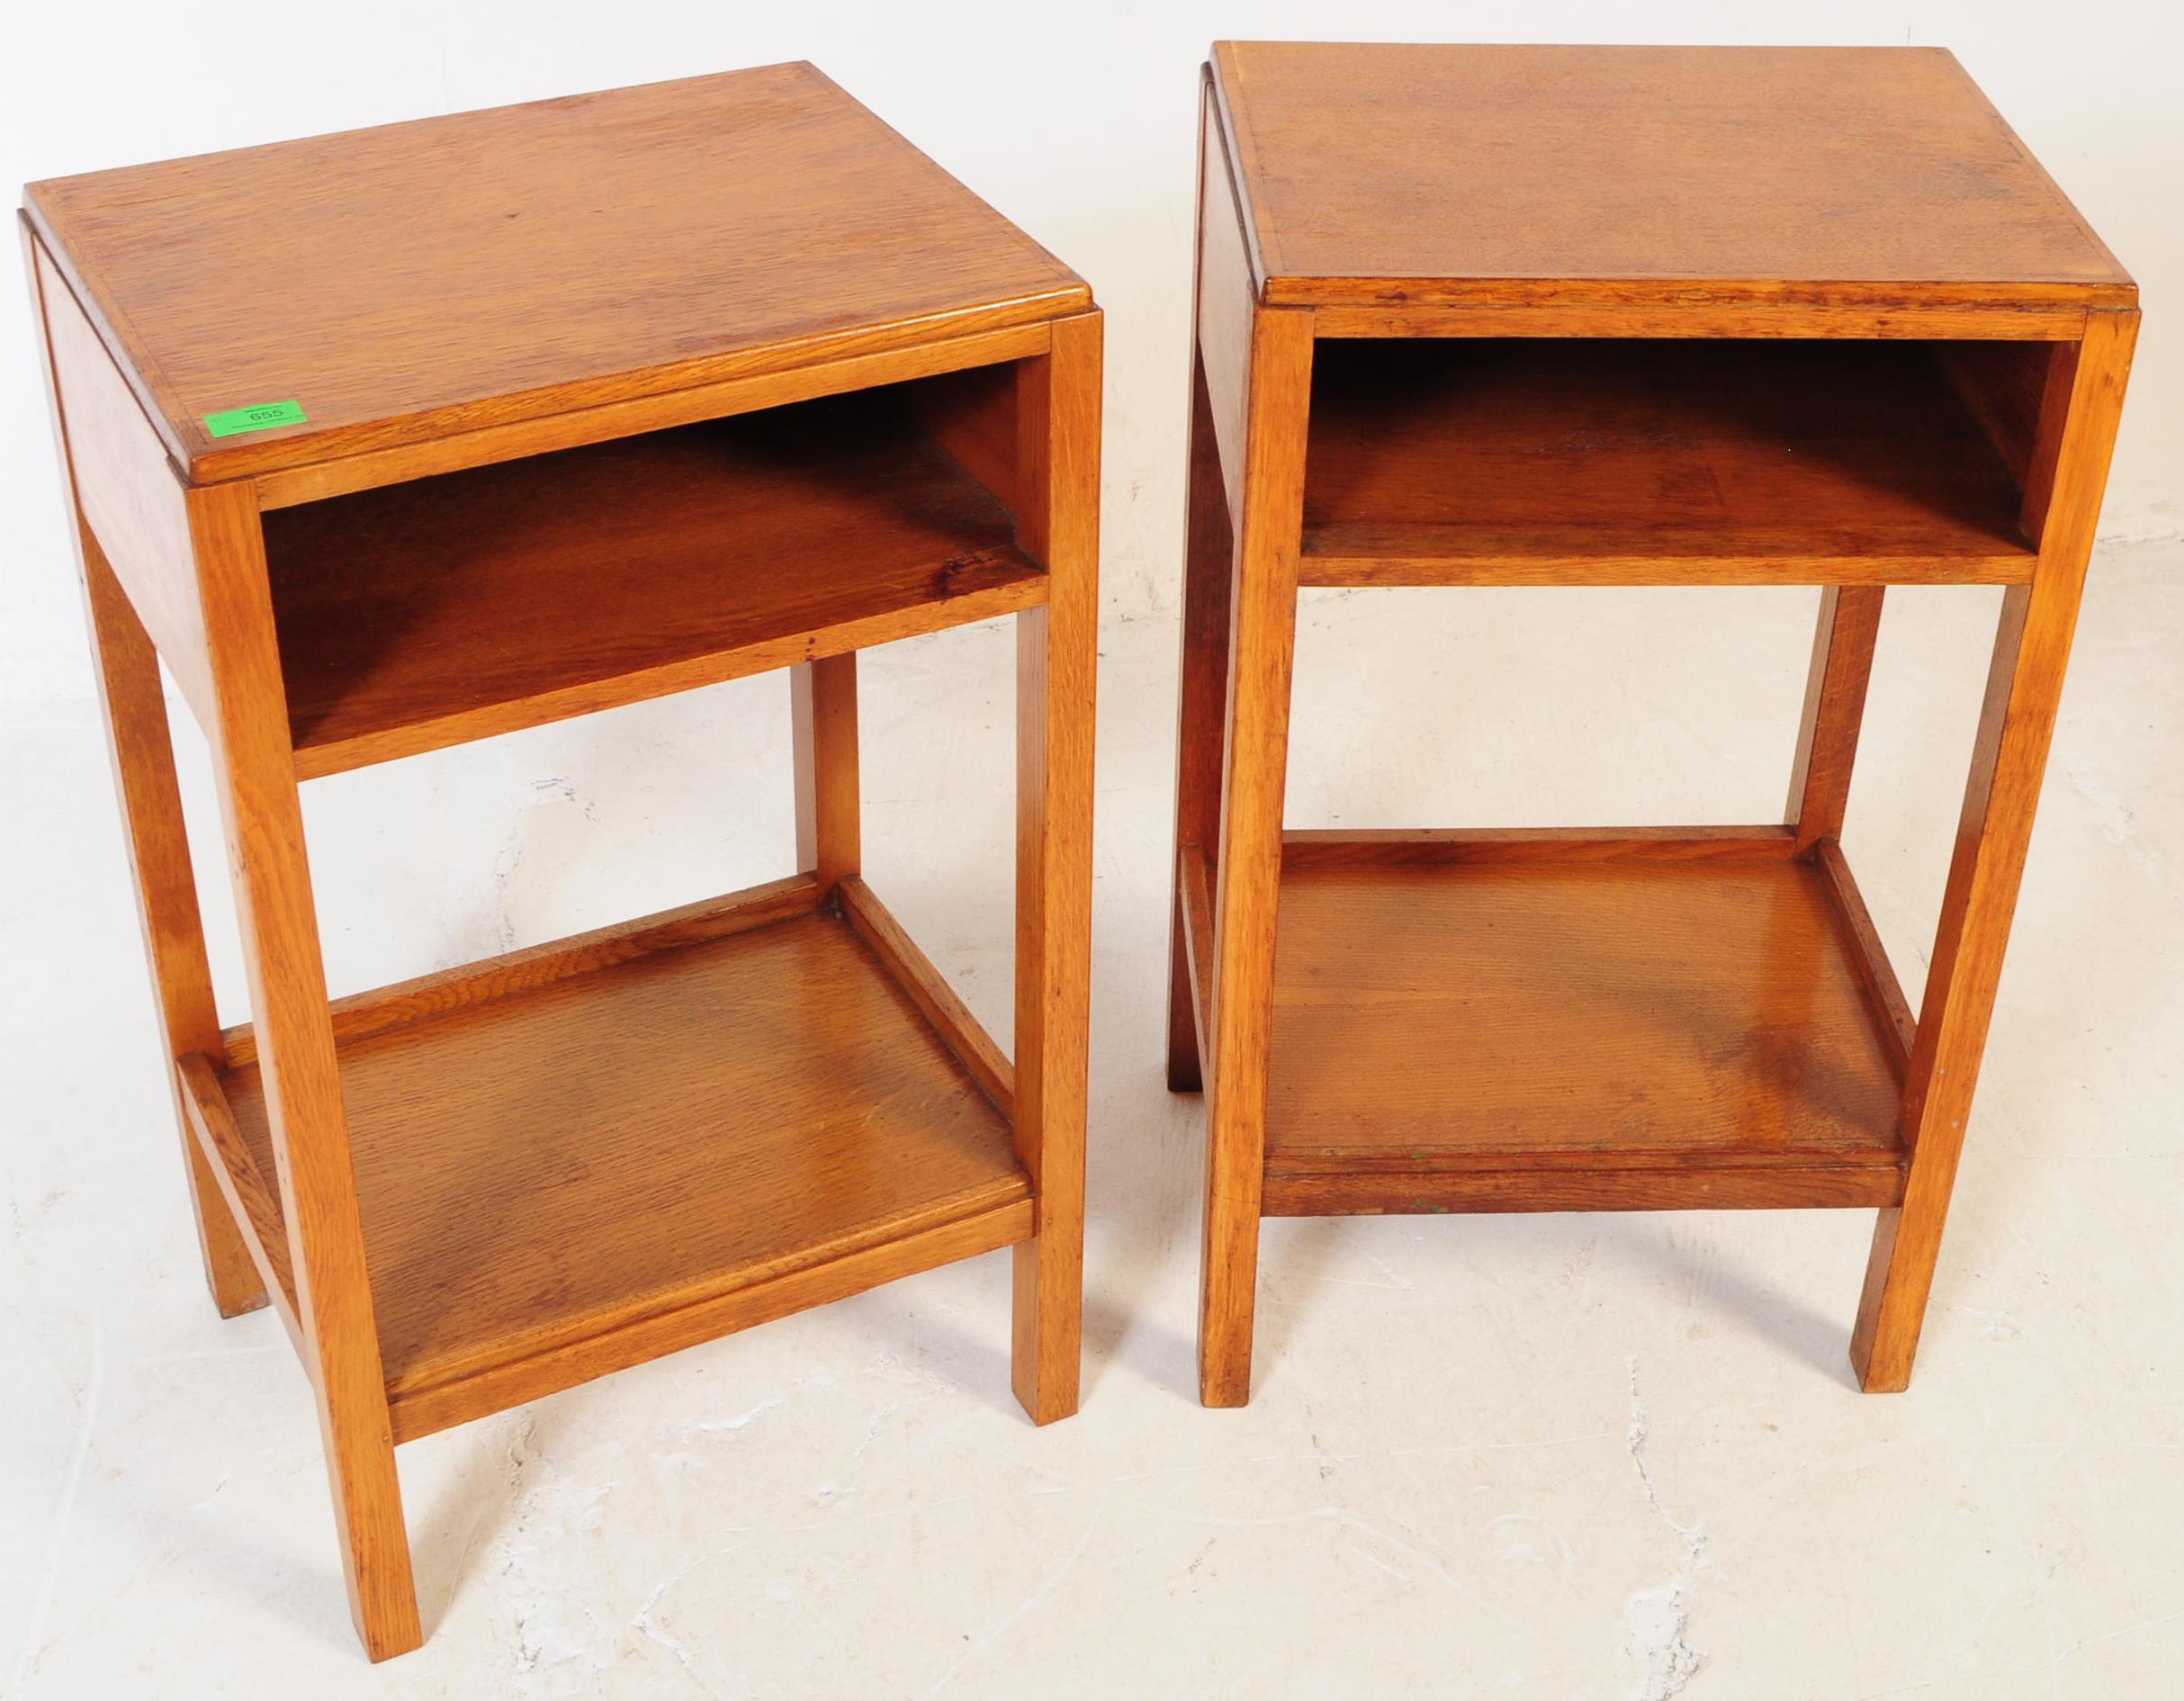 PAIR OF MID CENTURY AIR MINISTRY MANNER BEDSIDE TABLES - Image 2 of 6